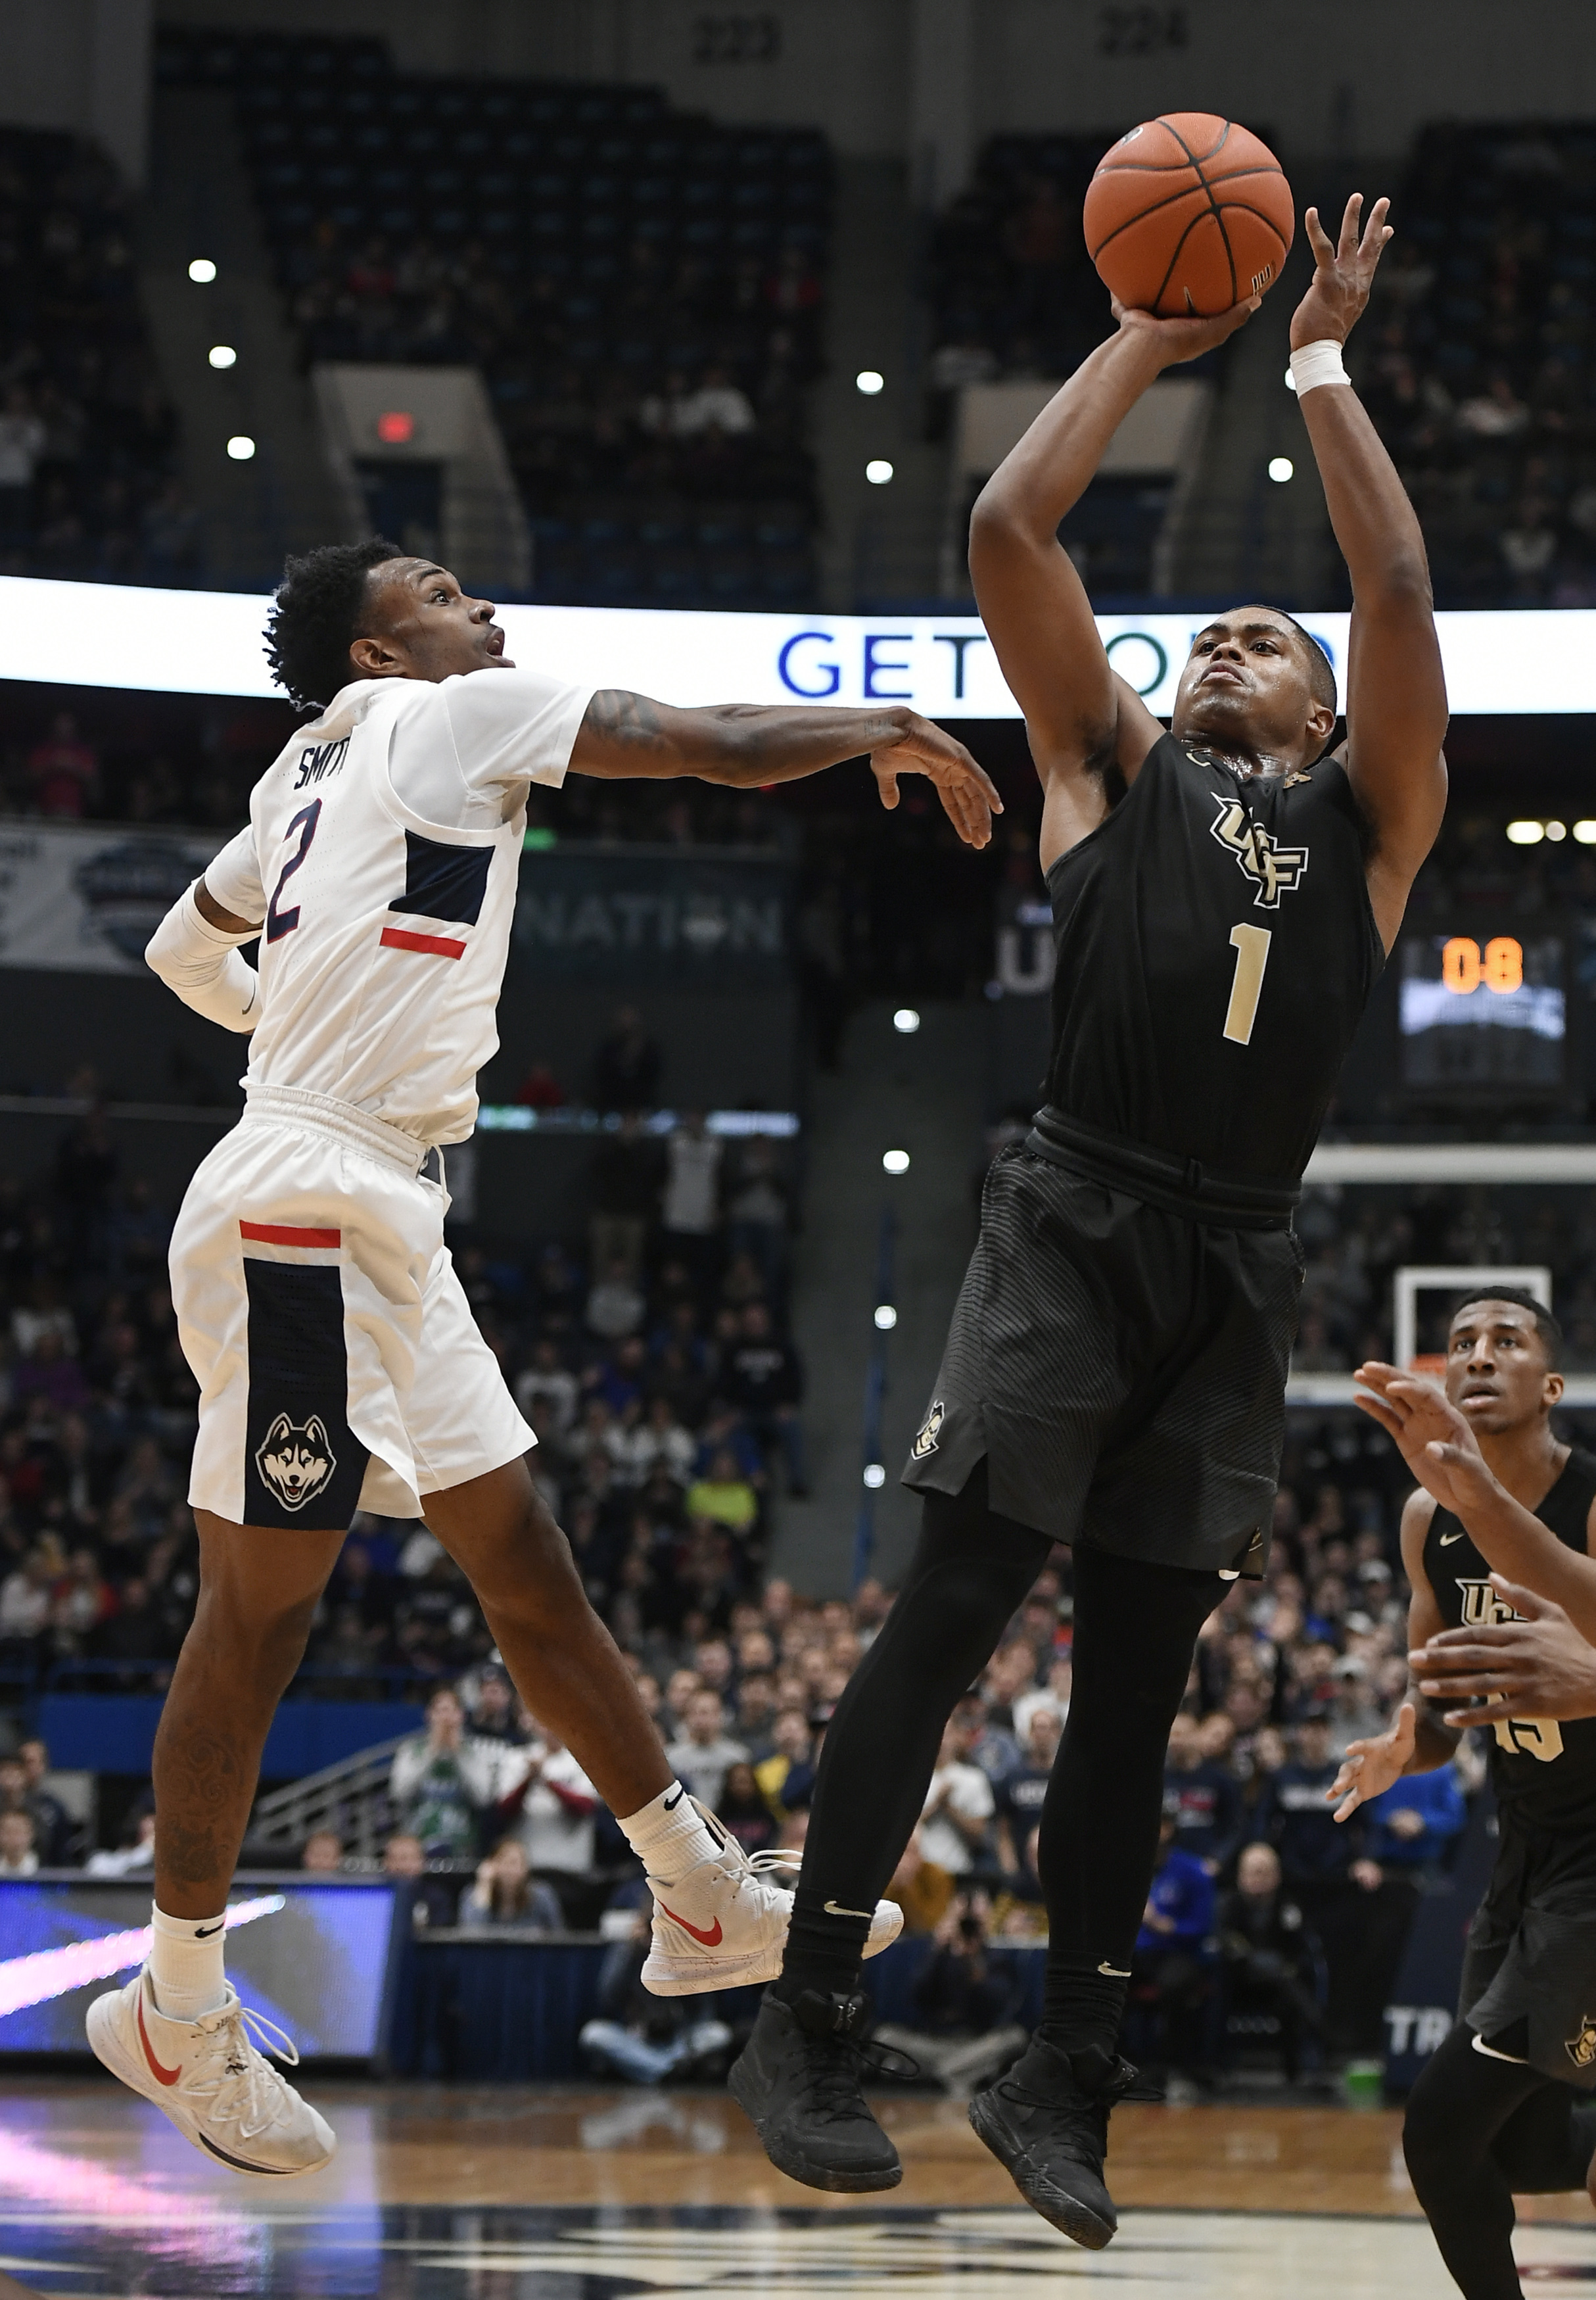 Dawkins scores 13 points and UCF beats UConn on the road